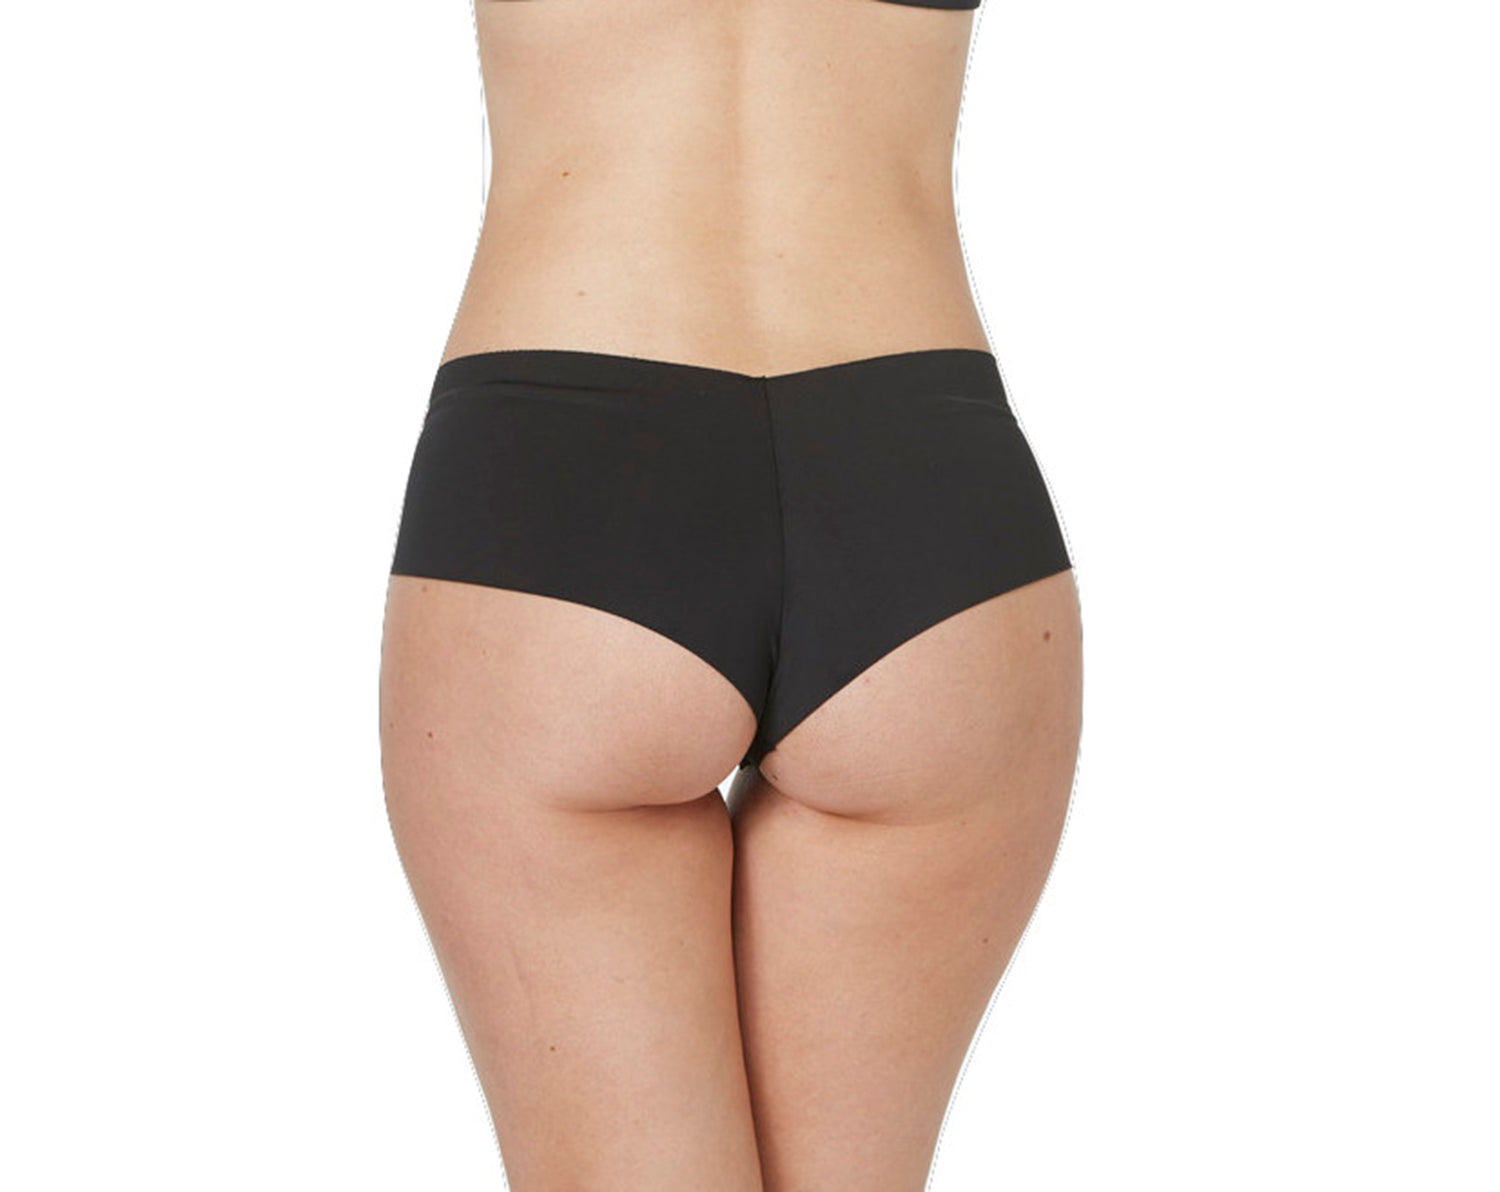 Swimsuit Camel Toe - An Overview